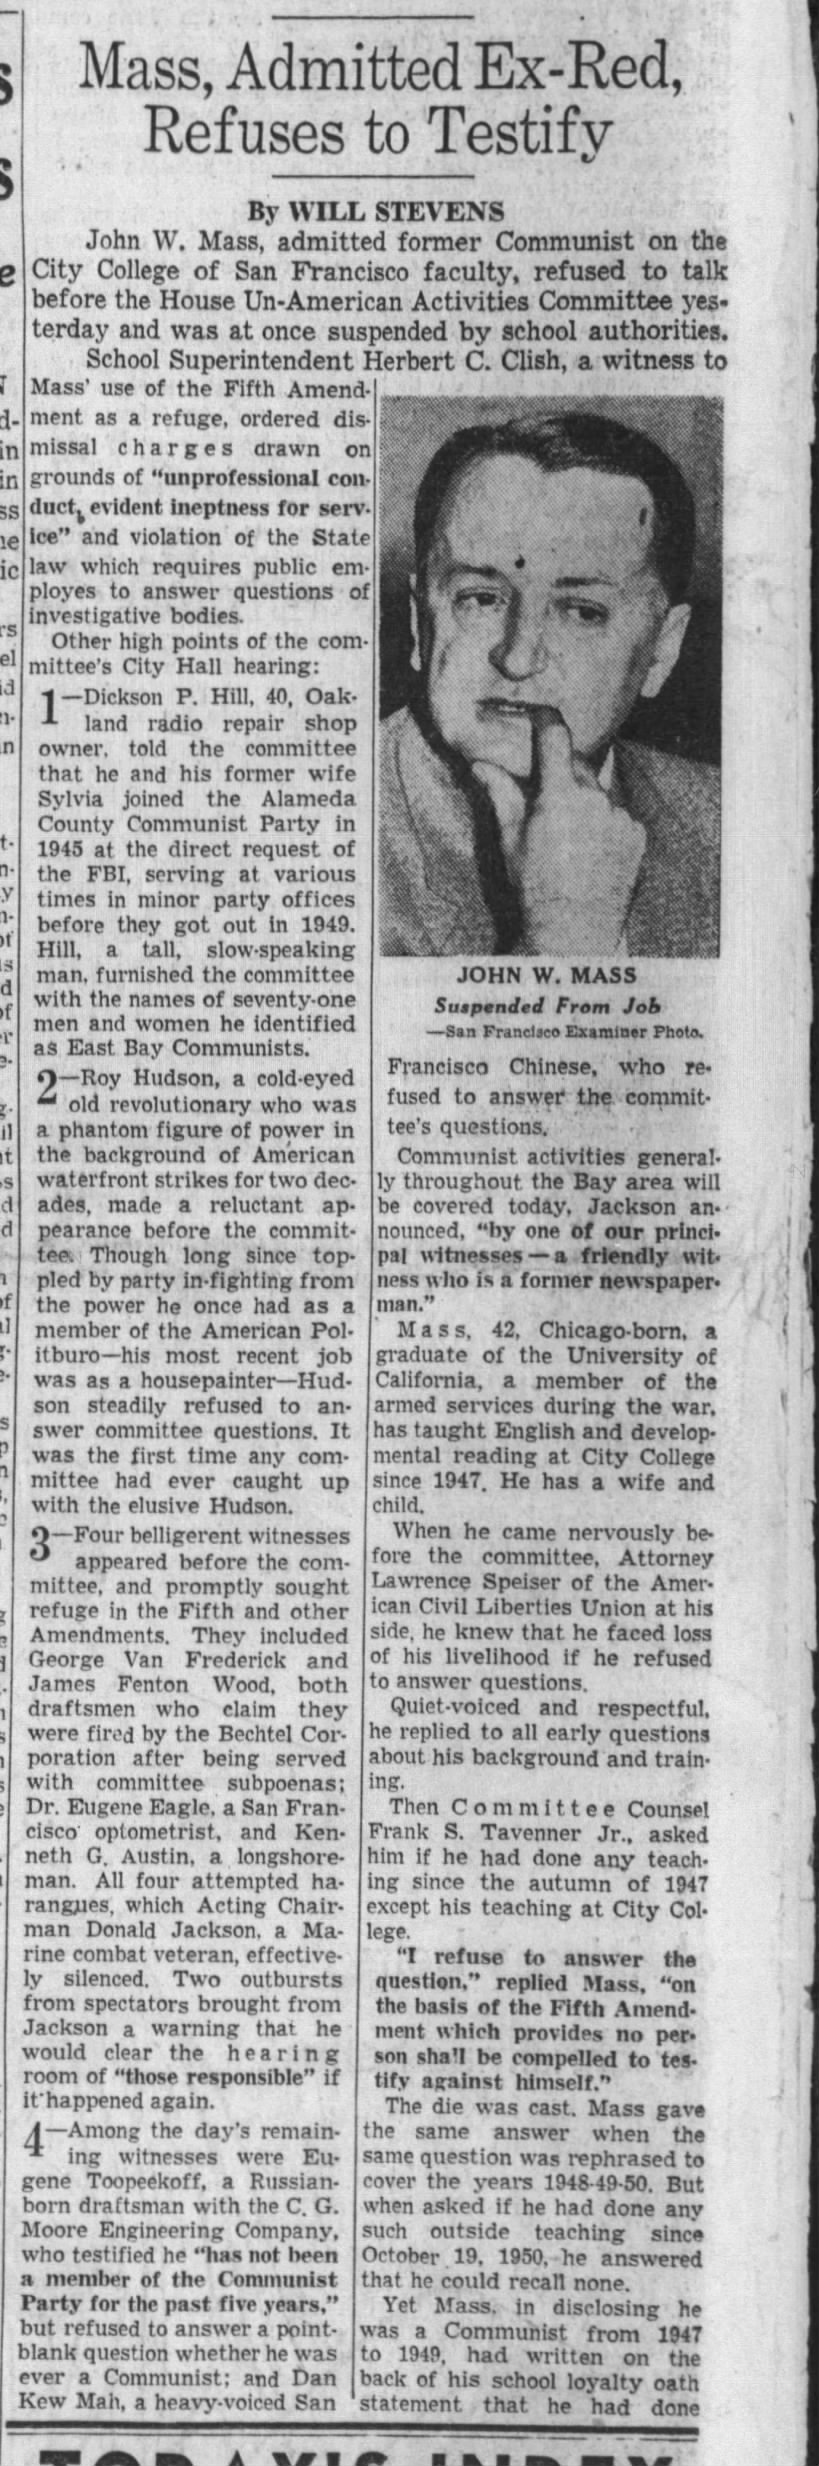 John Mass, Admitted Ex-Red, Refuses to Testify - Dec 1953